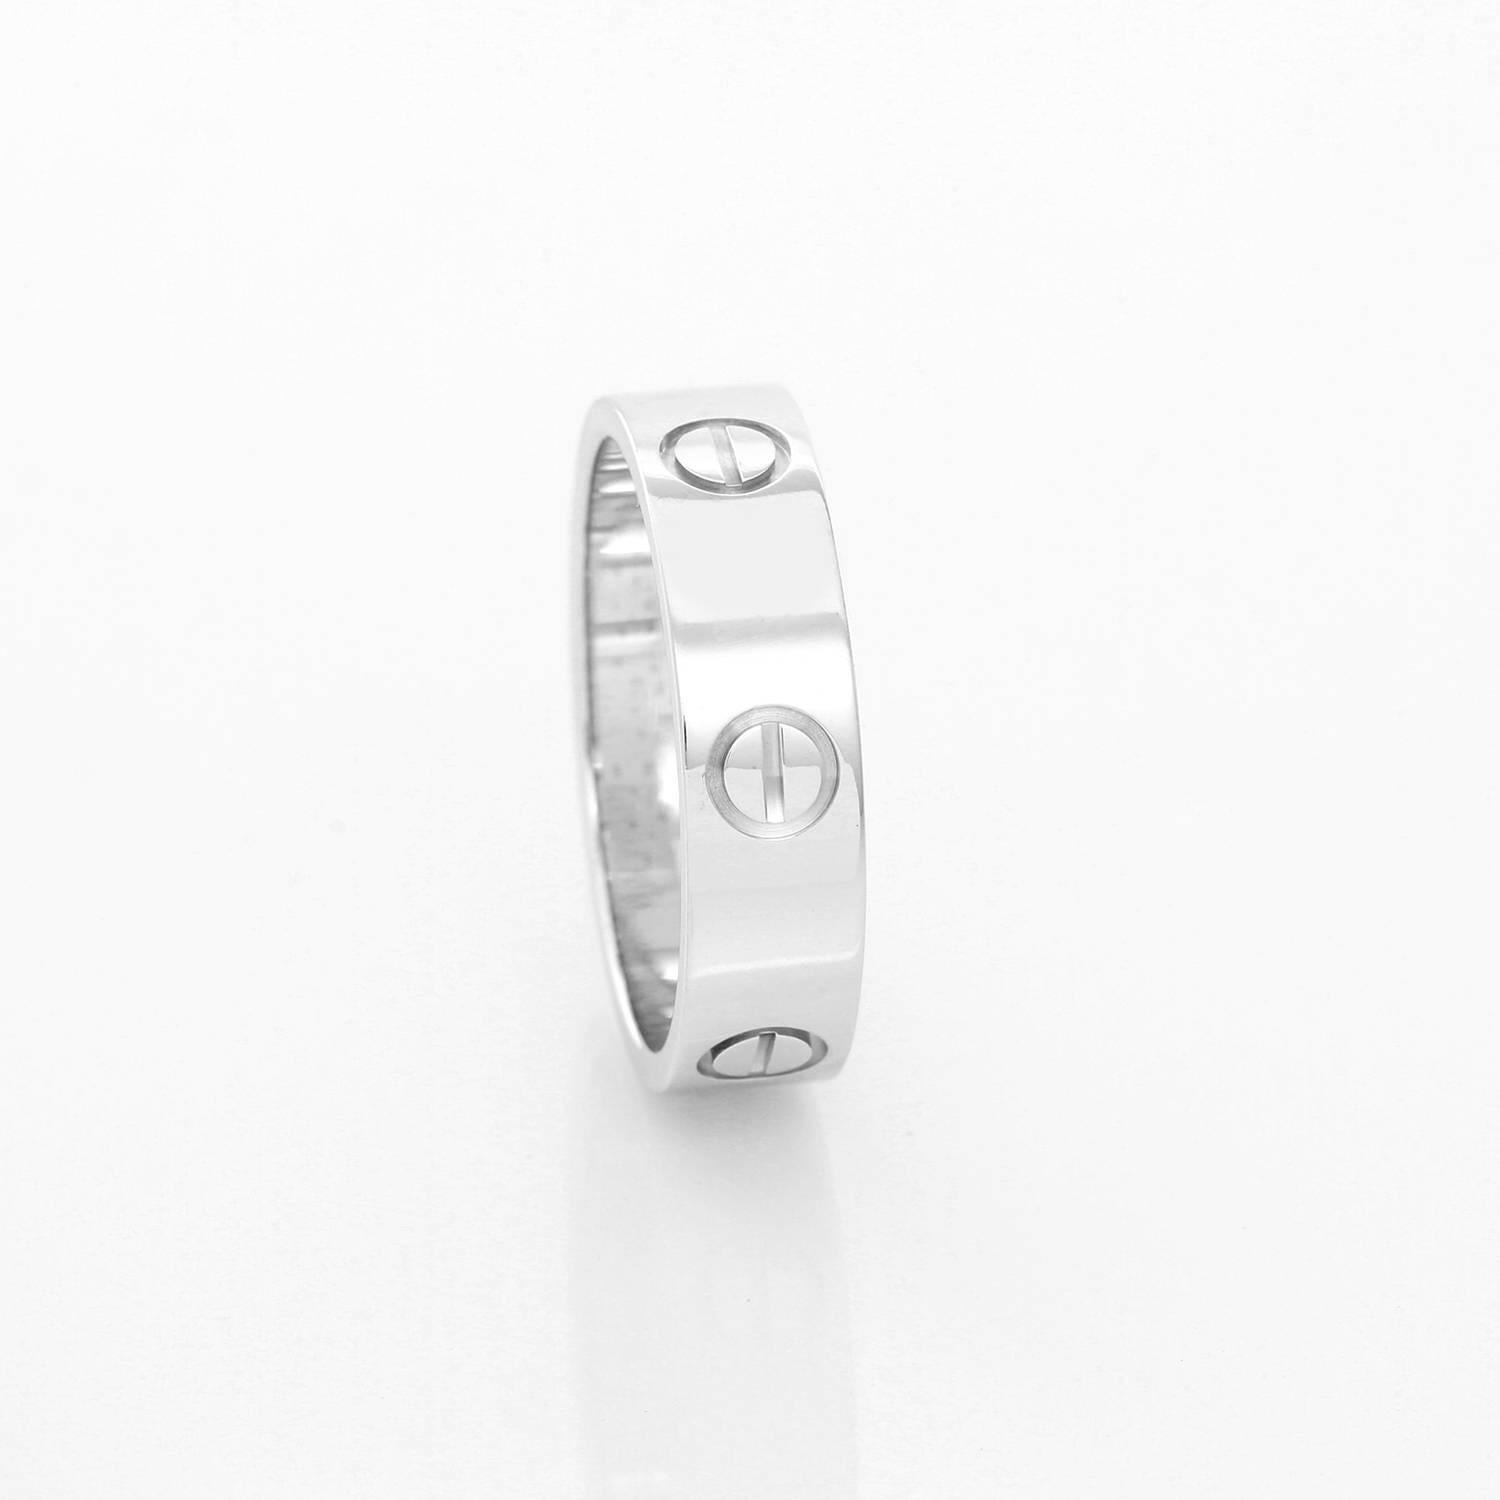 cartier love ring stamp